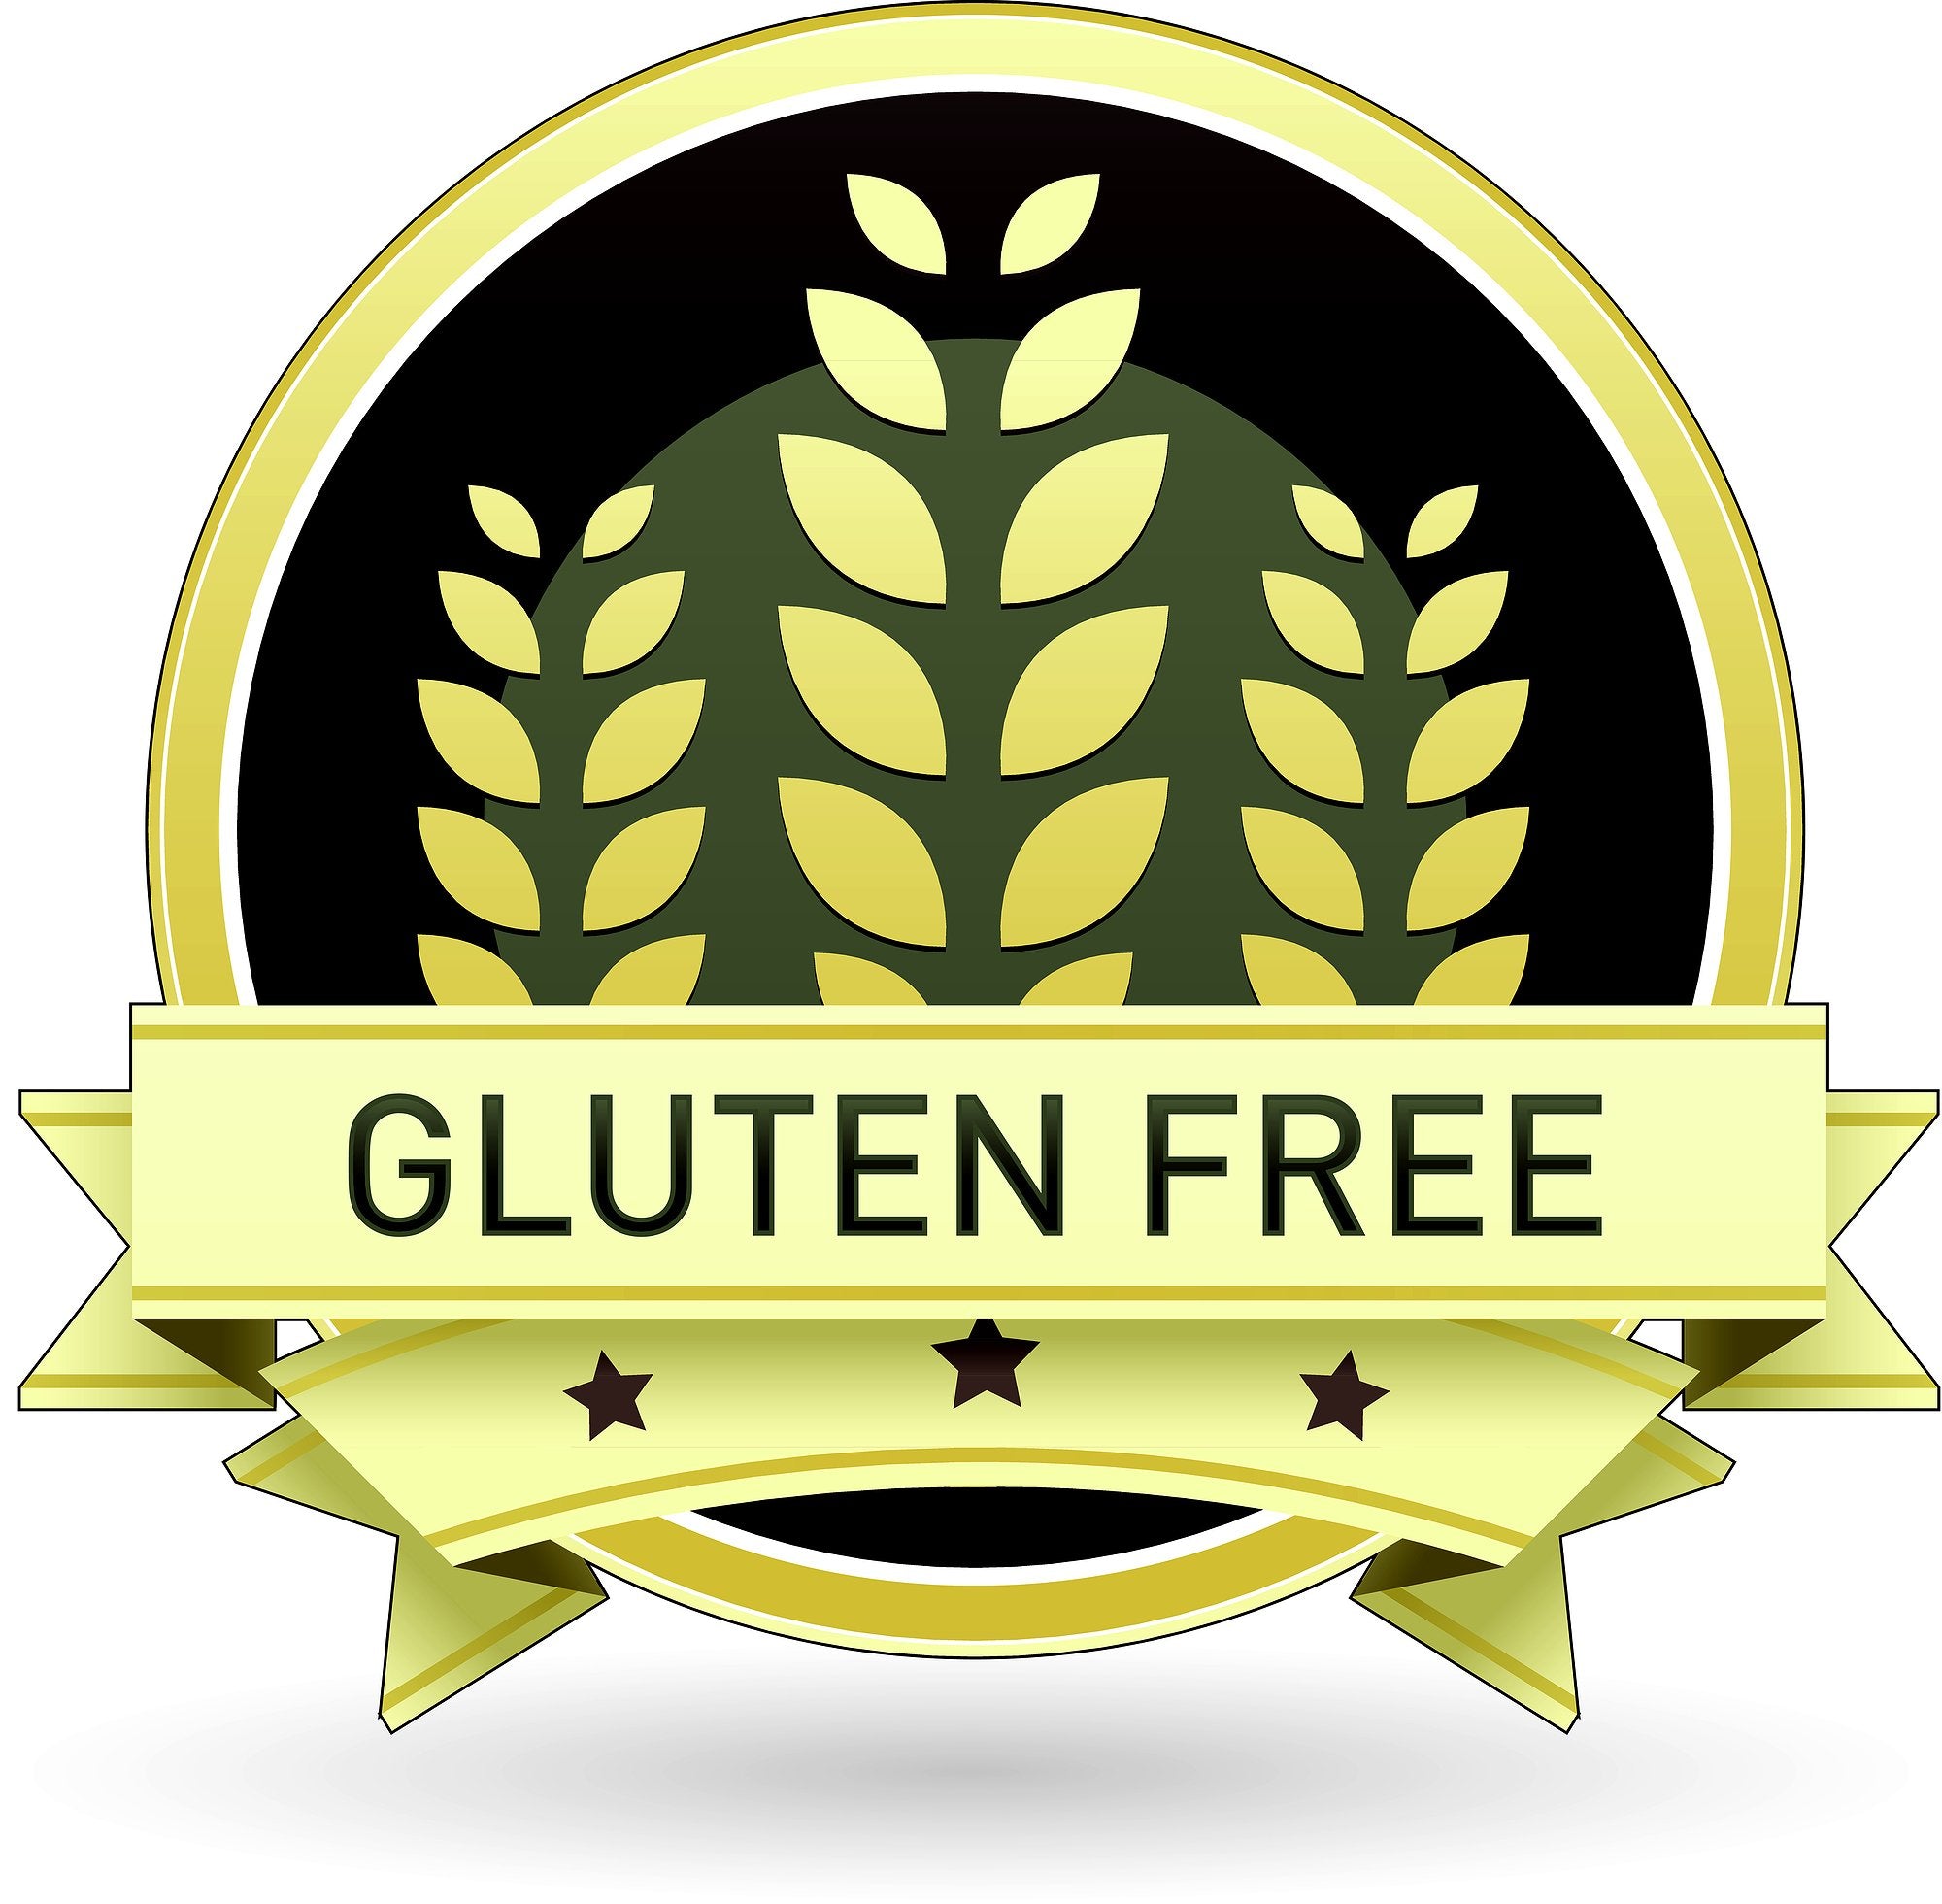 Is going gluten free necessary for optimal health?